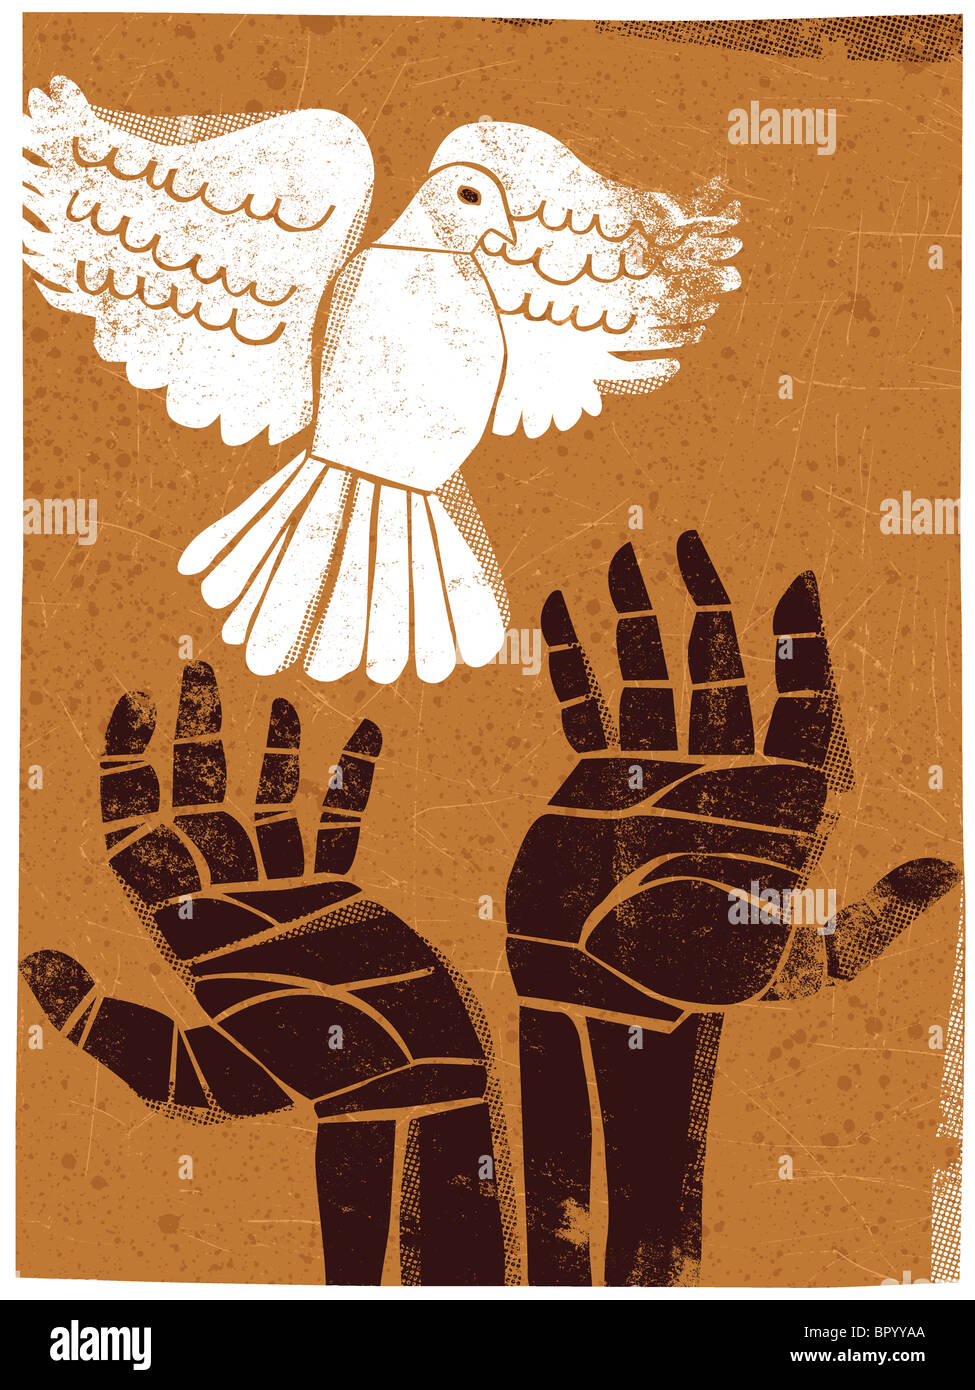 Illustration of hands releasing a dove Stock Photo